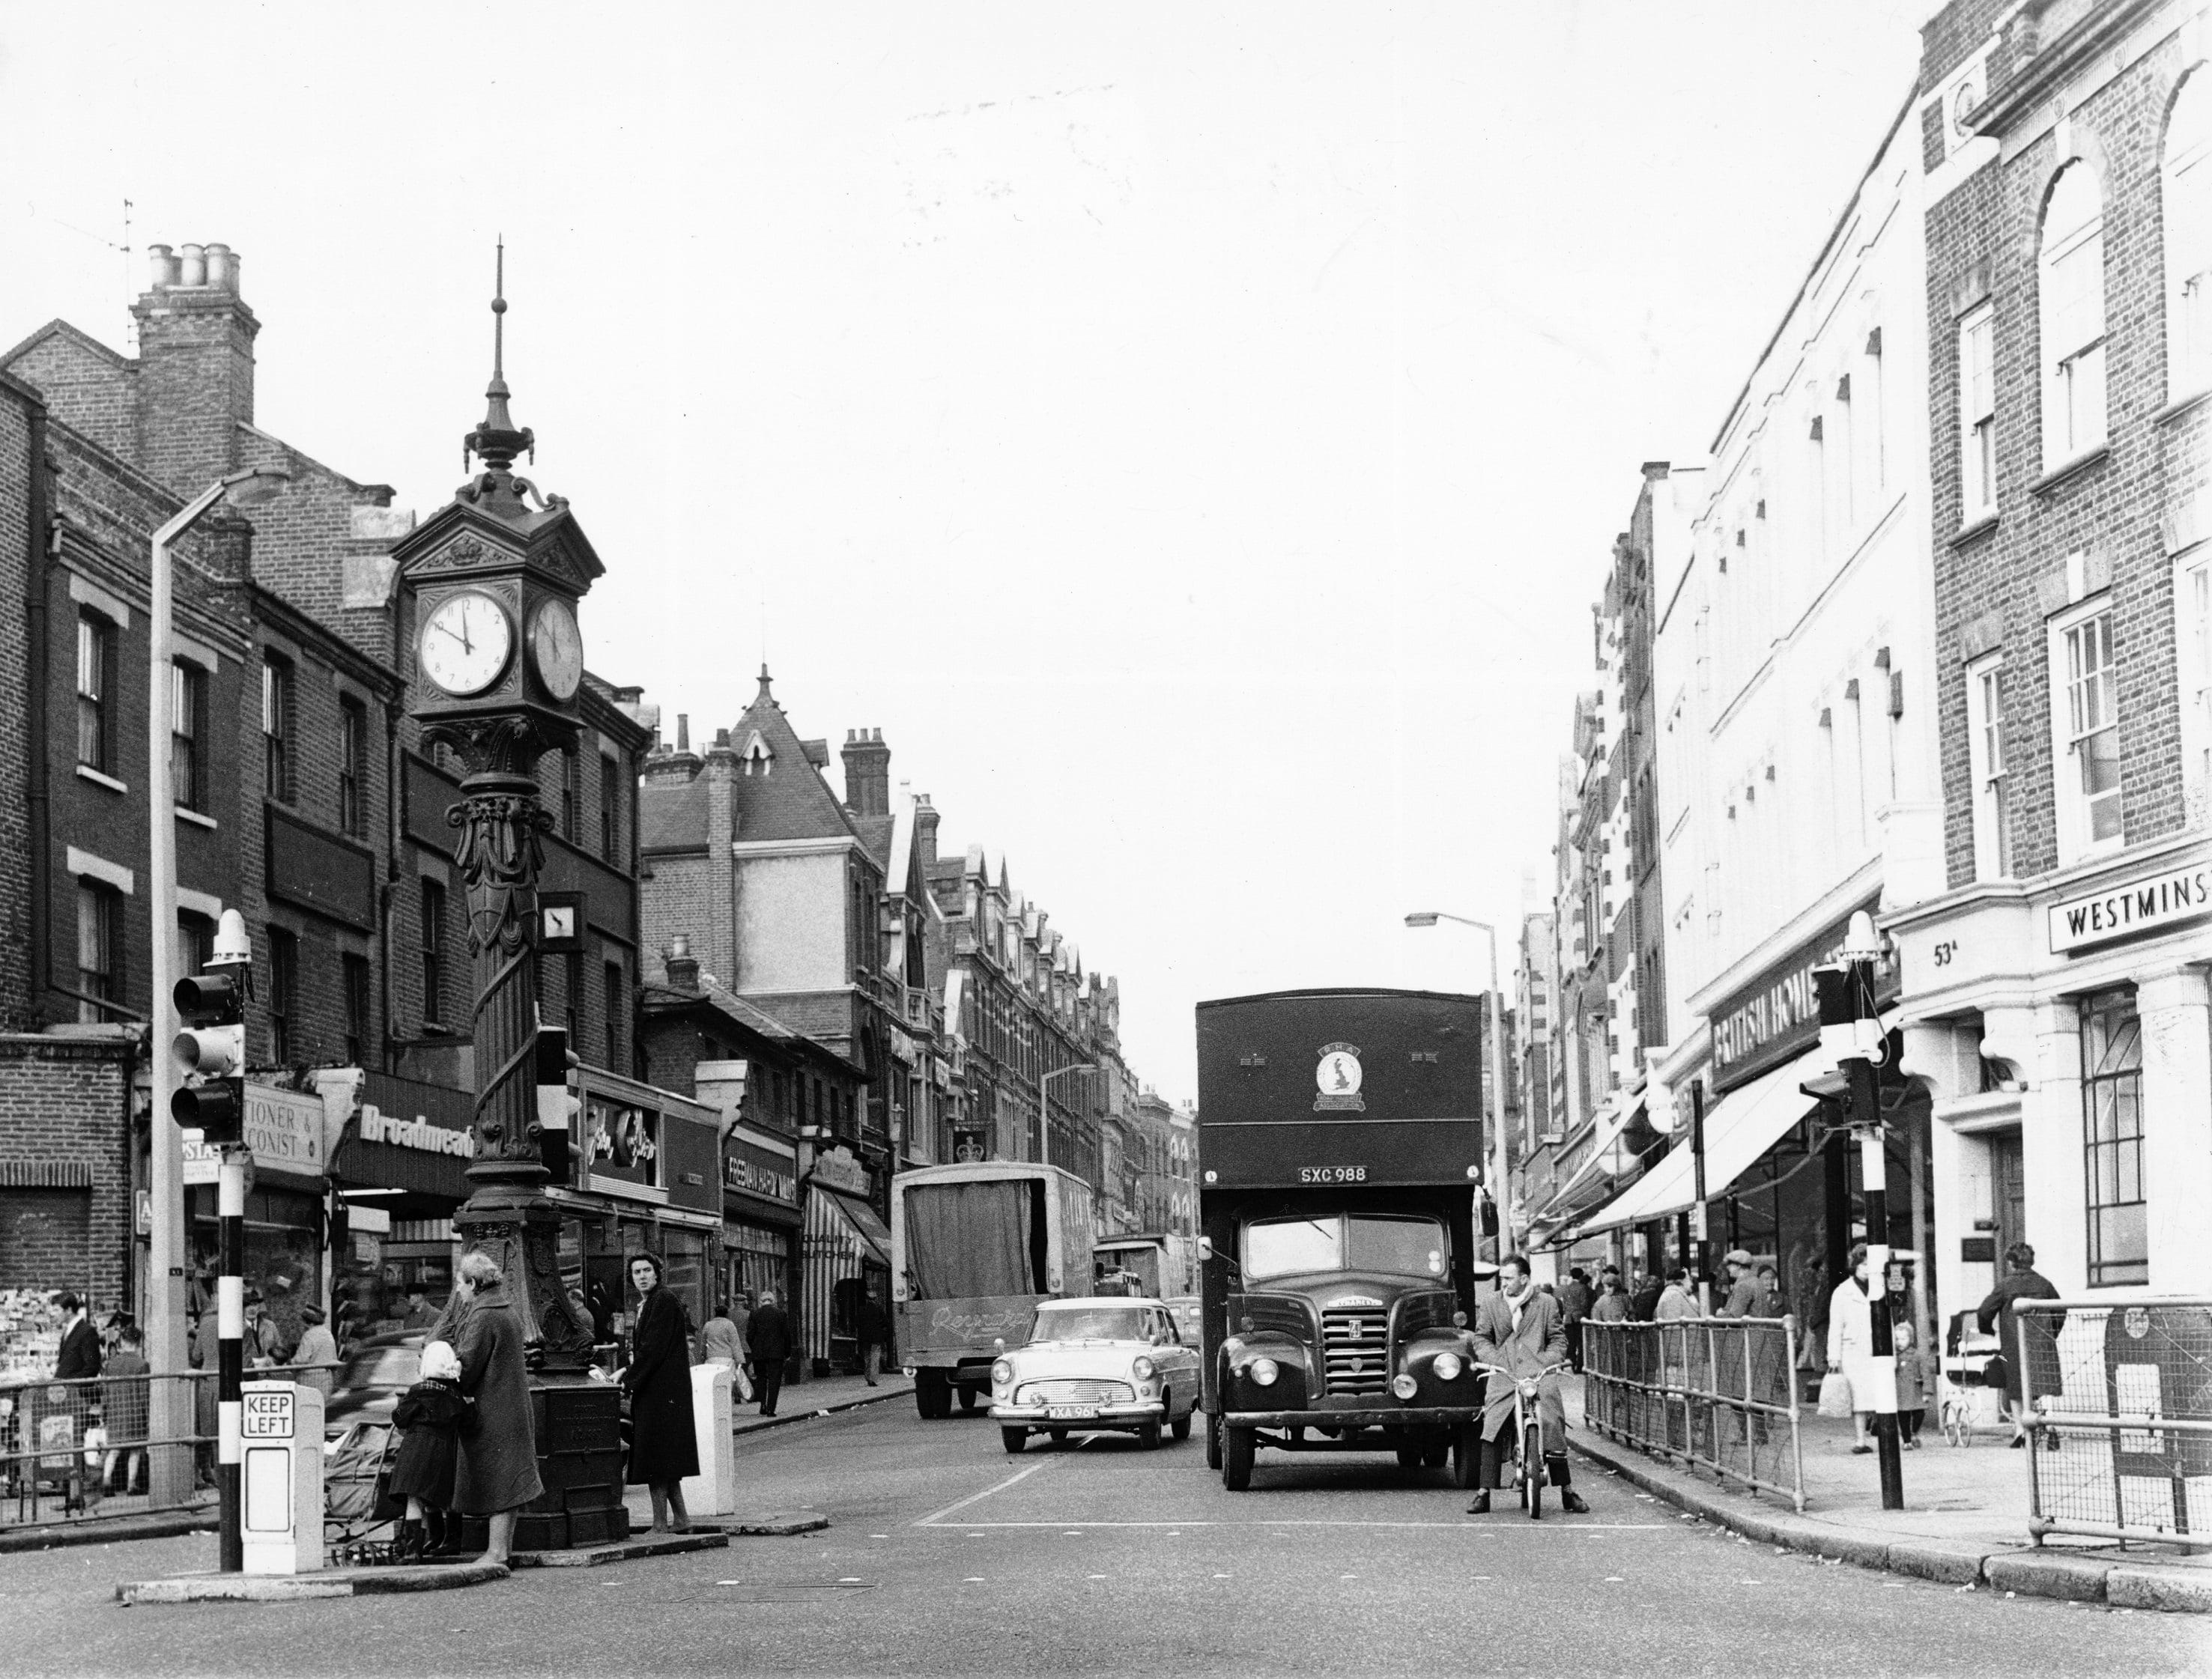 Black and white photograph showing a London street junction with busy traffic. An historic clock visible on the left hand side.